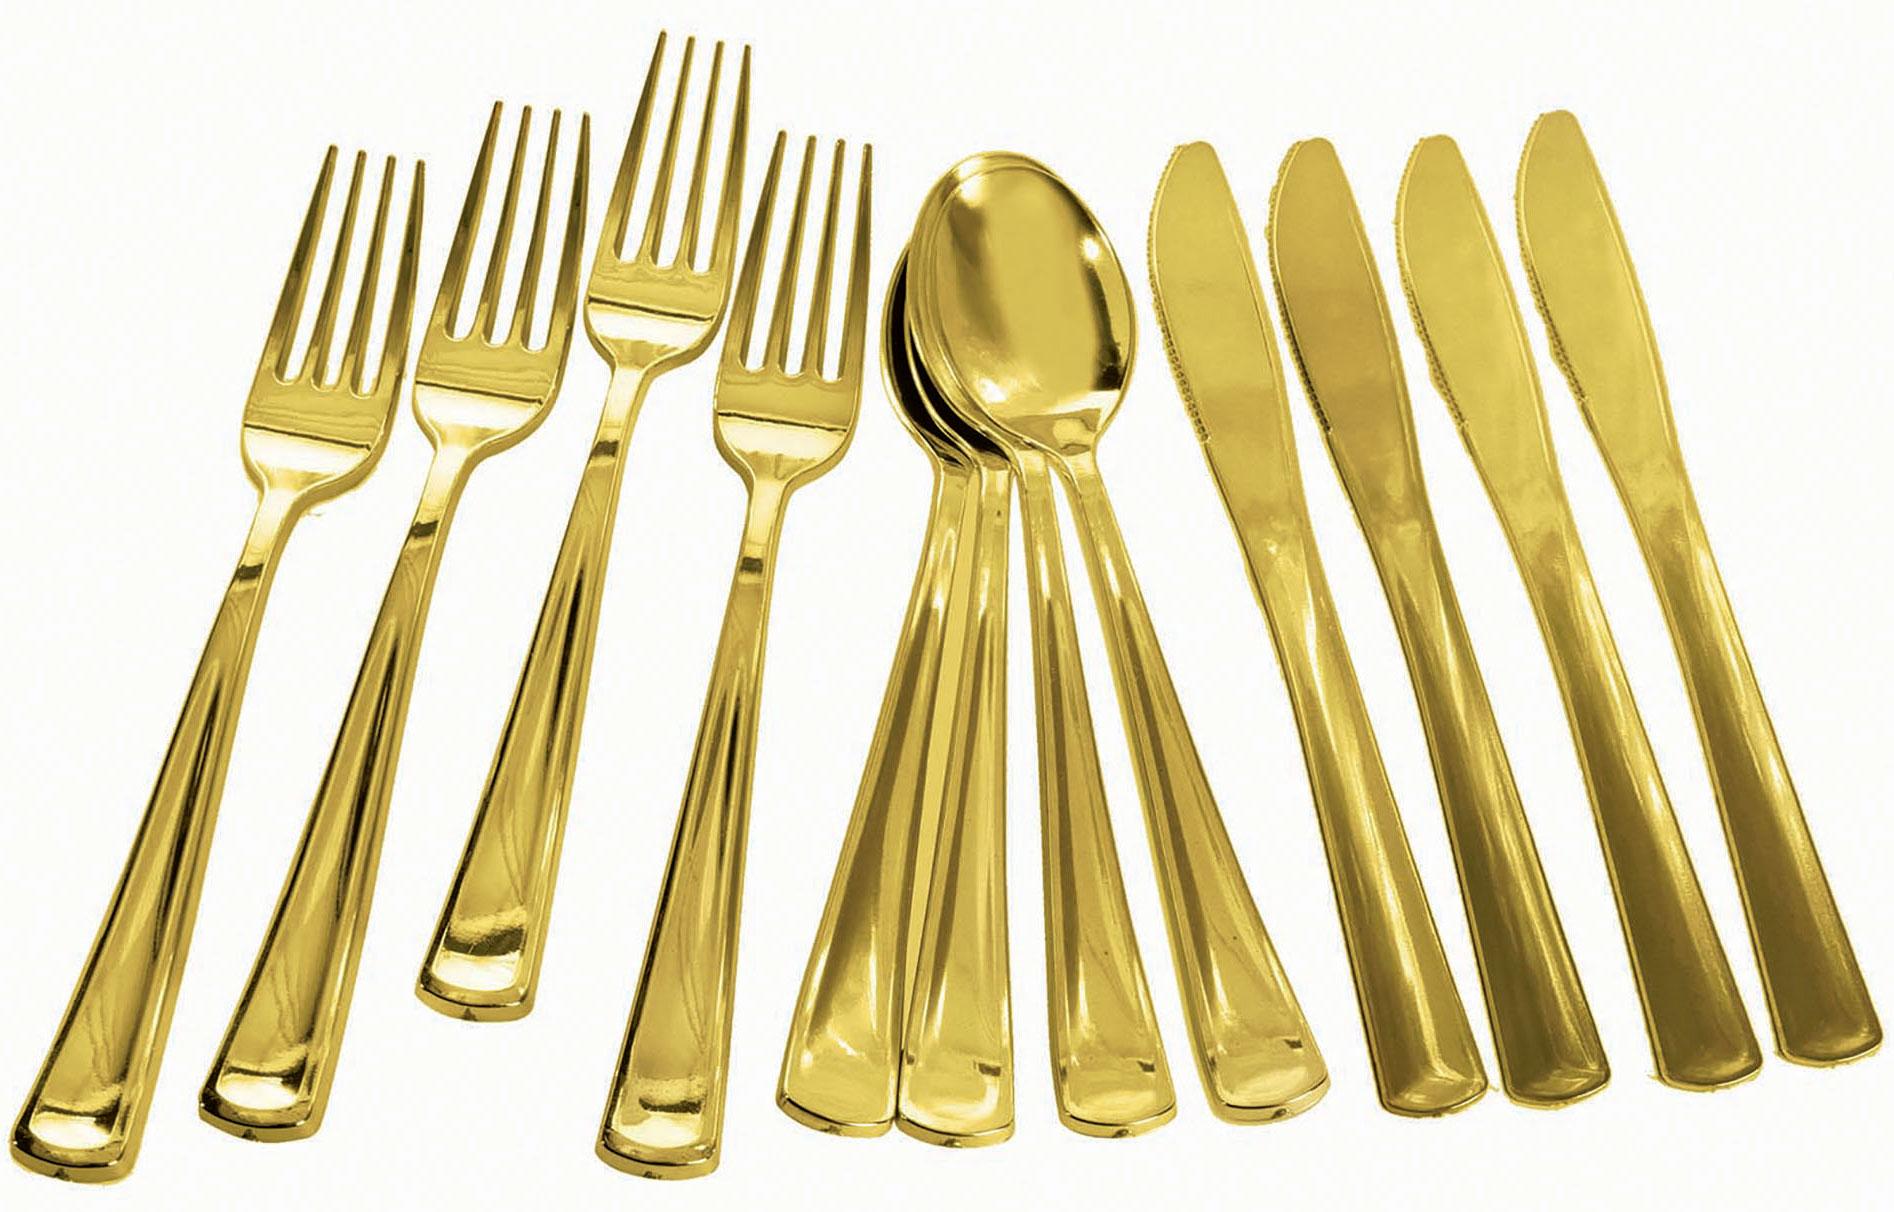 Gold Cutlery Assortment pk12 pieces, 4ea knives, forks and spoons by Forum Novelties 81860 available here at Karnival Costumes online party shop